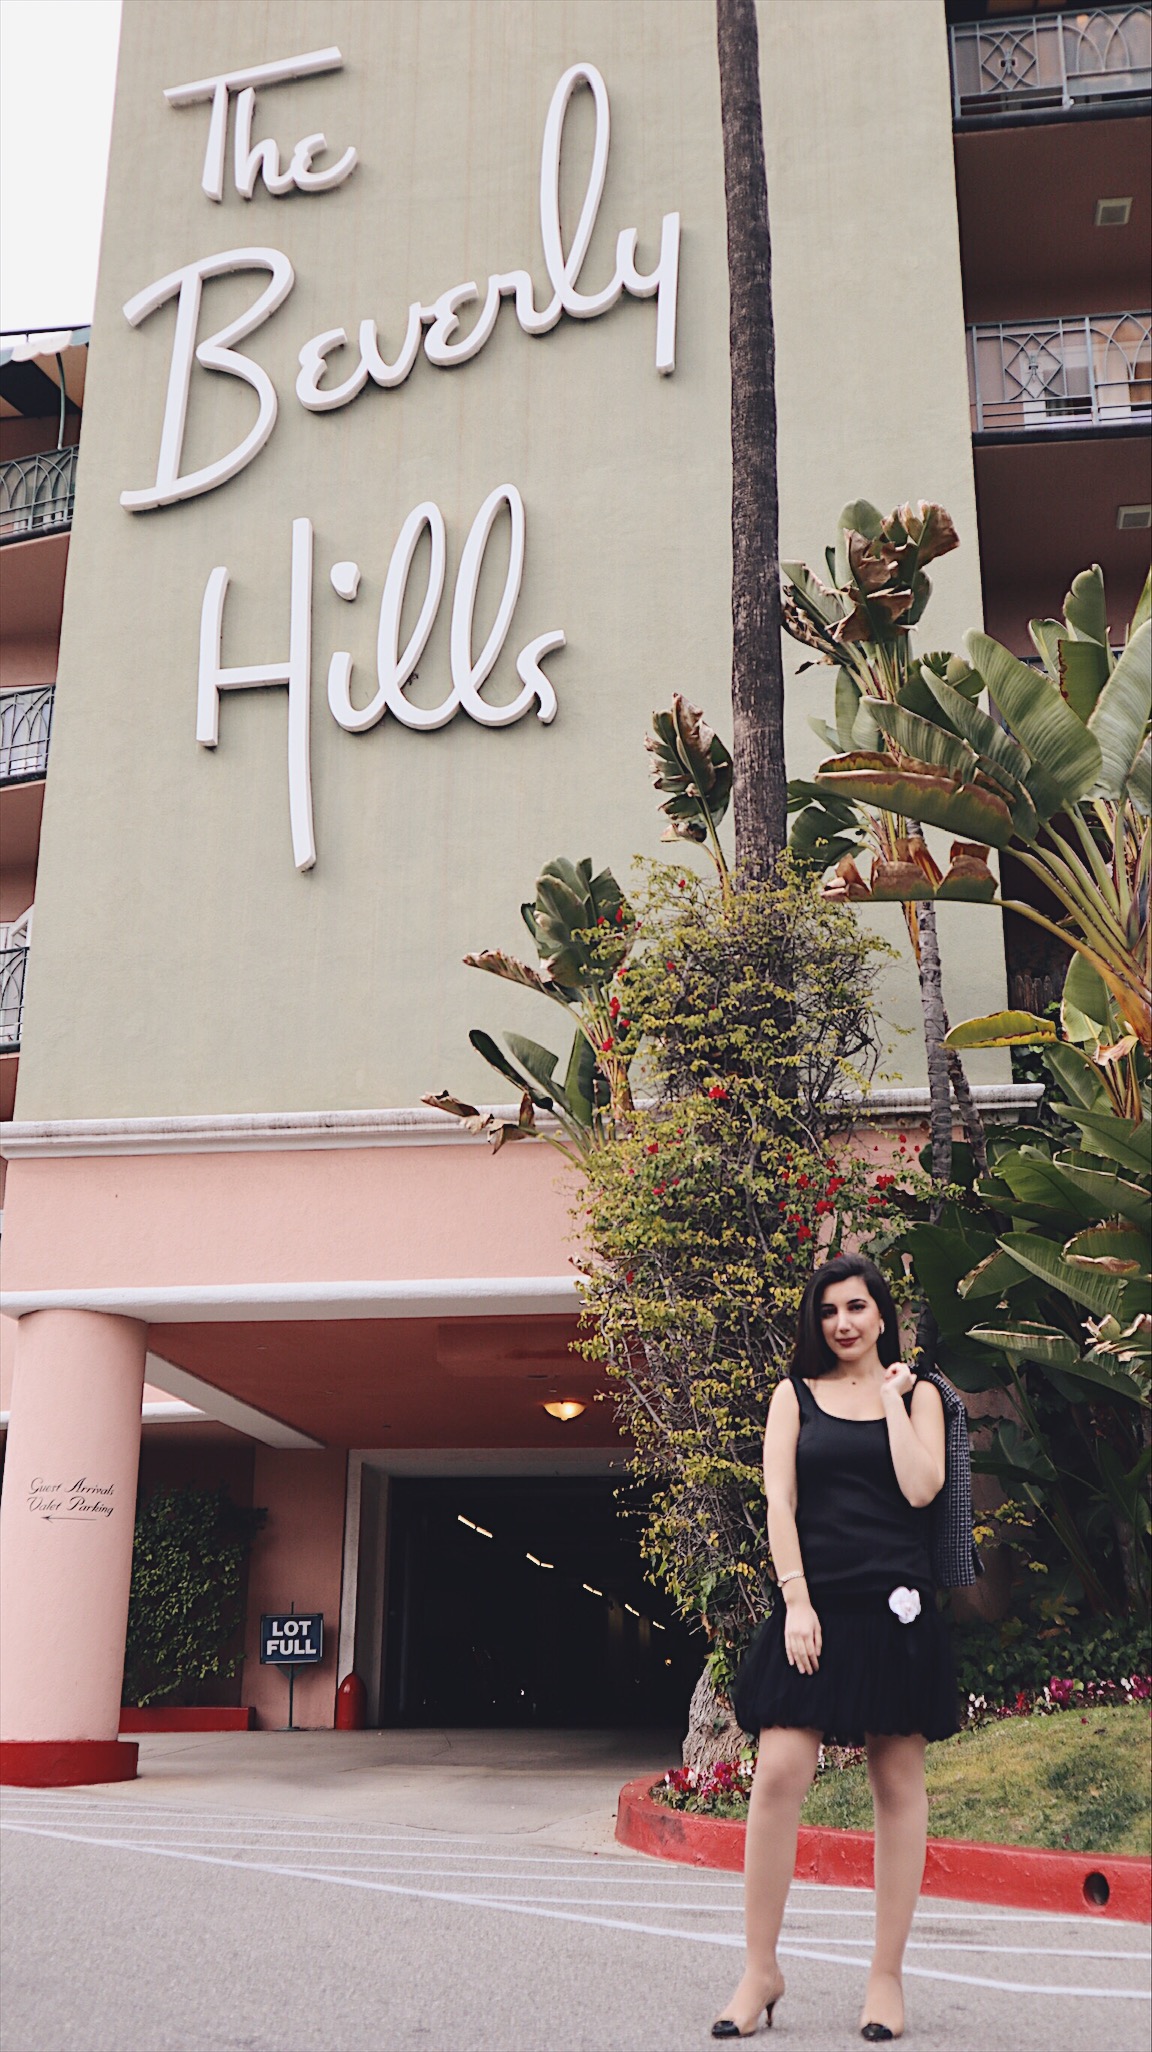 Beverly Hills Hotel, brunch, brunch outfit, lookbook, Chanel, vintage, fashion blogger, style blogger, outfit of the day, ootd, lookbook, Coach shoes, little black dress, LBD, pink and black, ladies who lunch